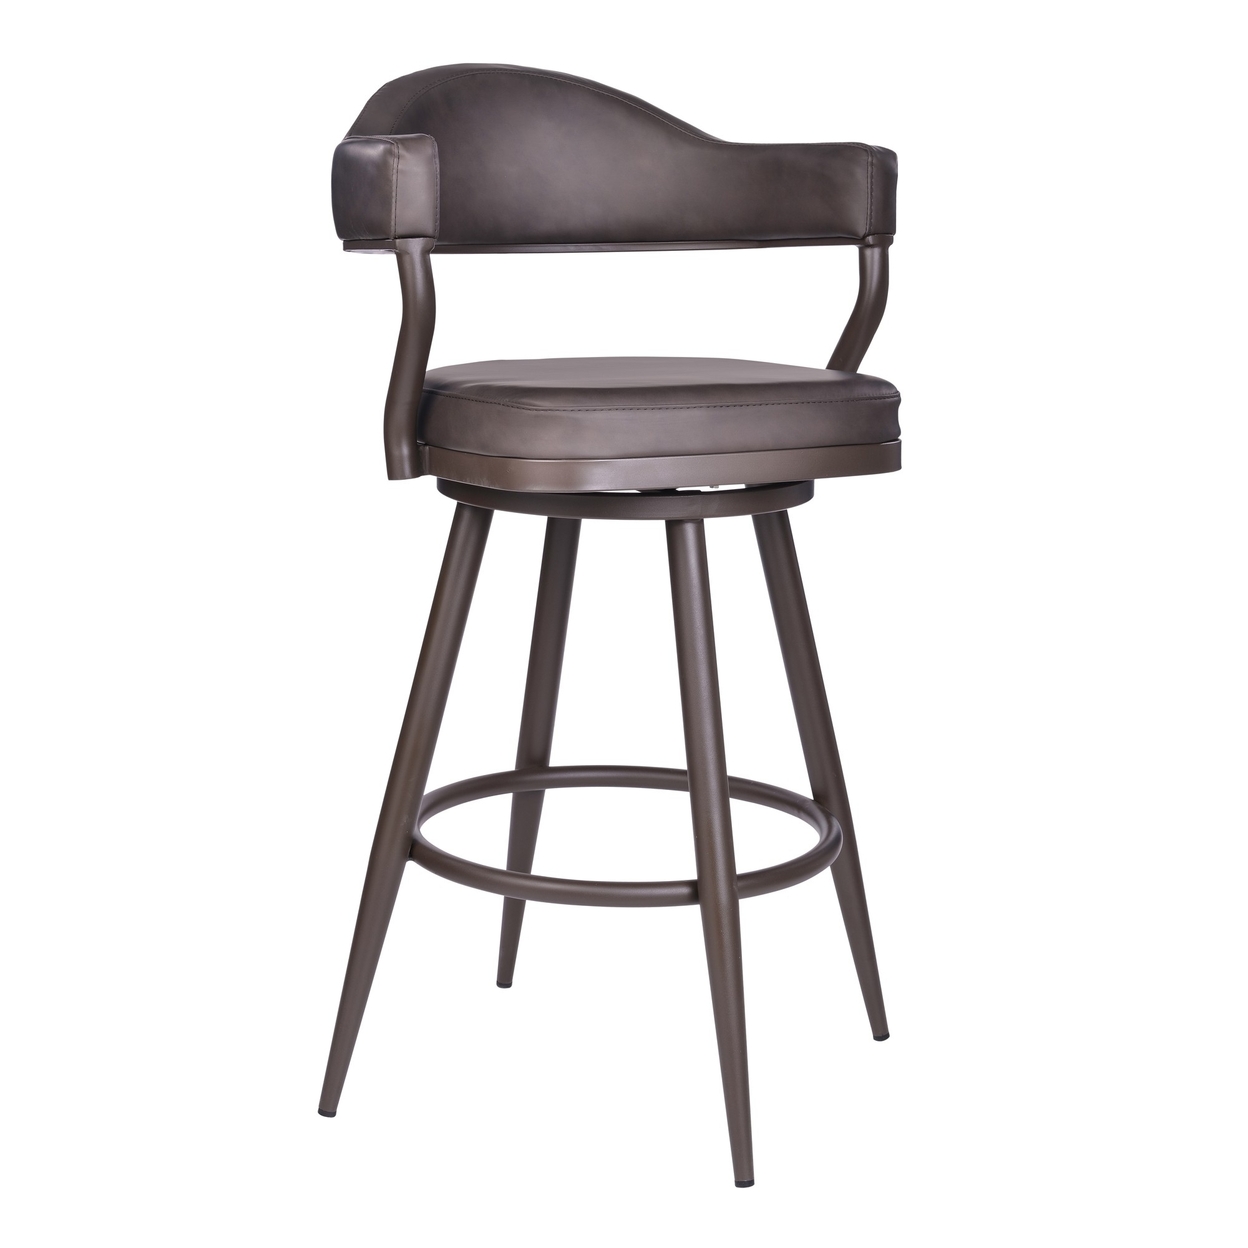 30 Faux Leather Barstool With Open Camelback Design, Brown- Saltoro Sherpi